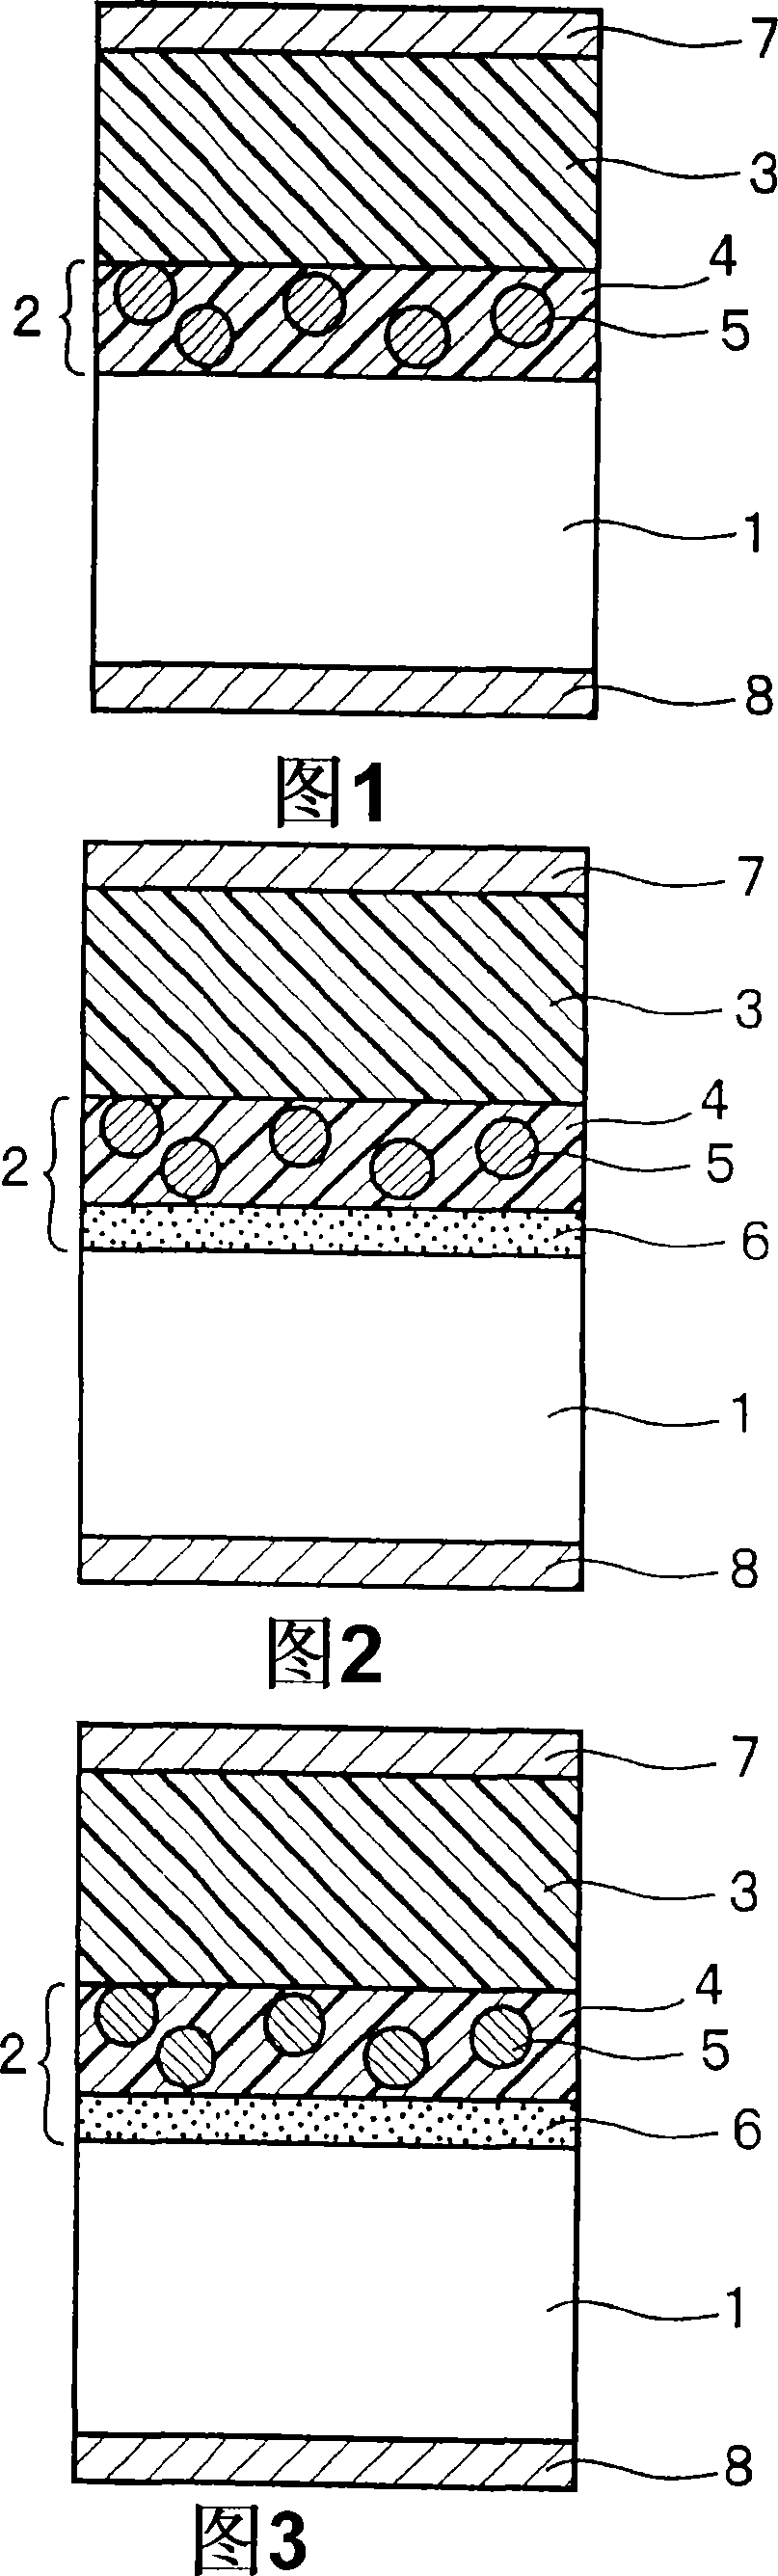 Multilayer optical device